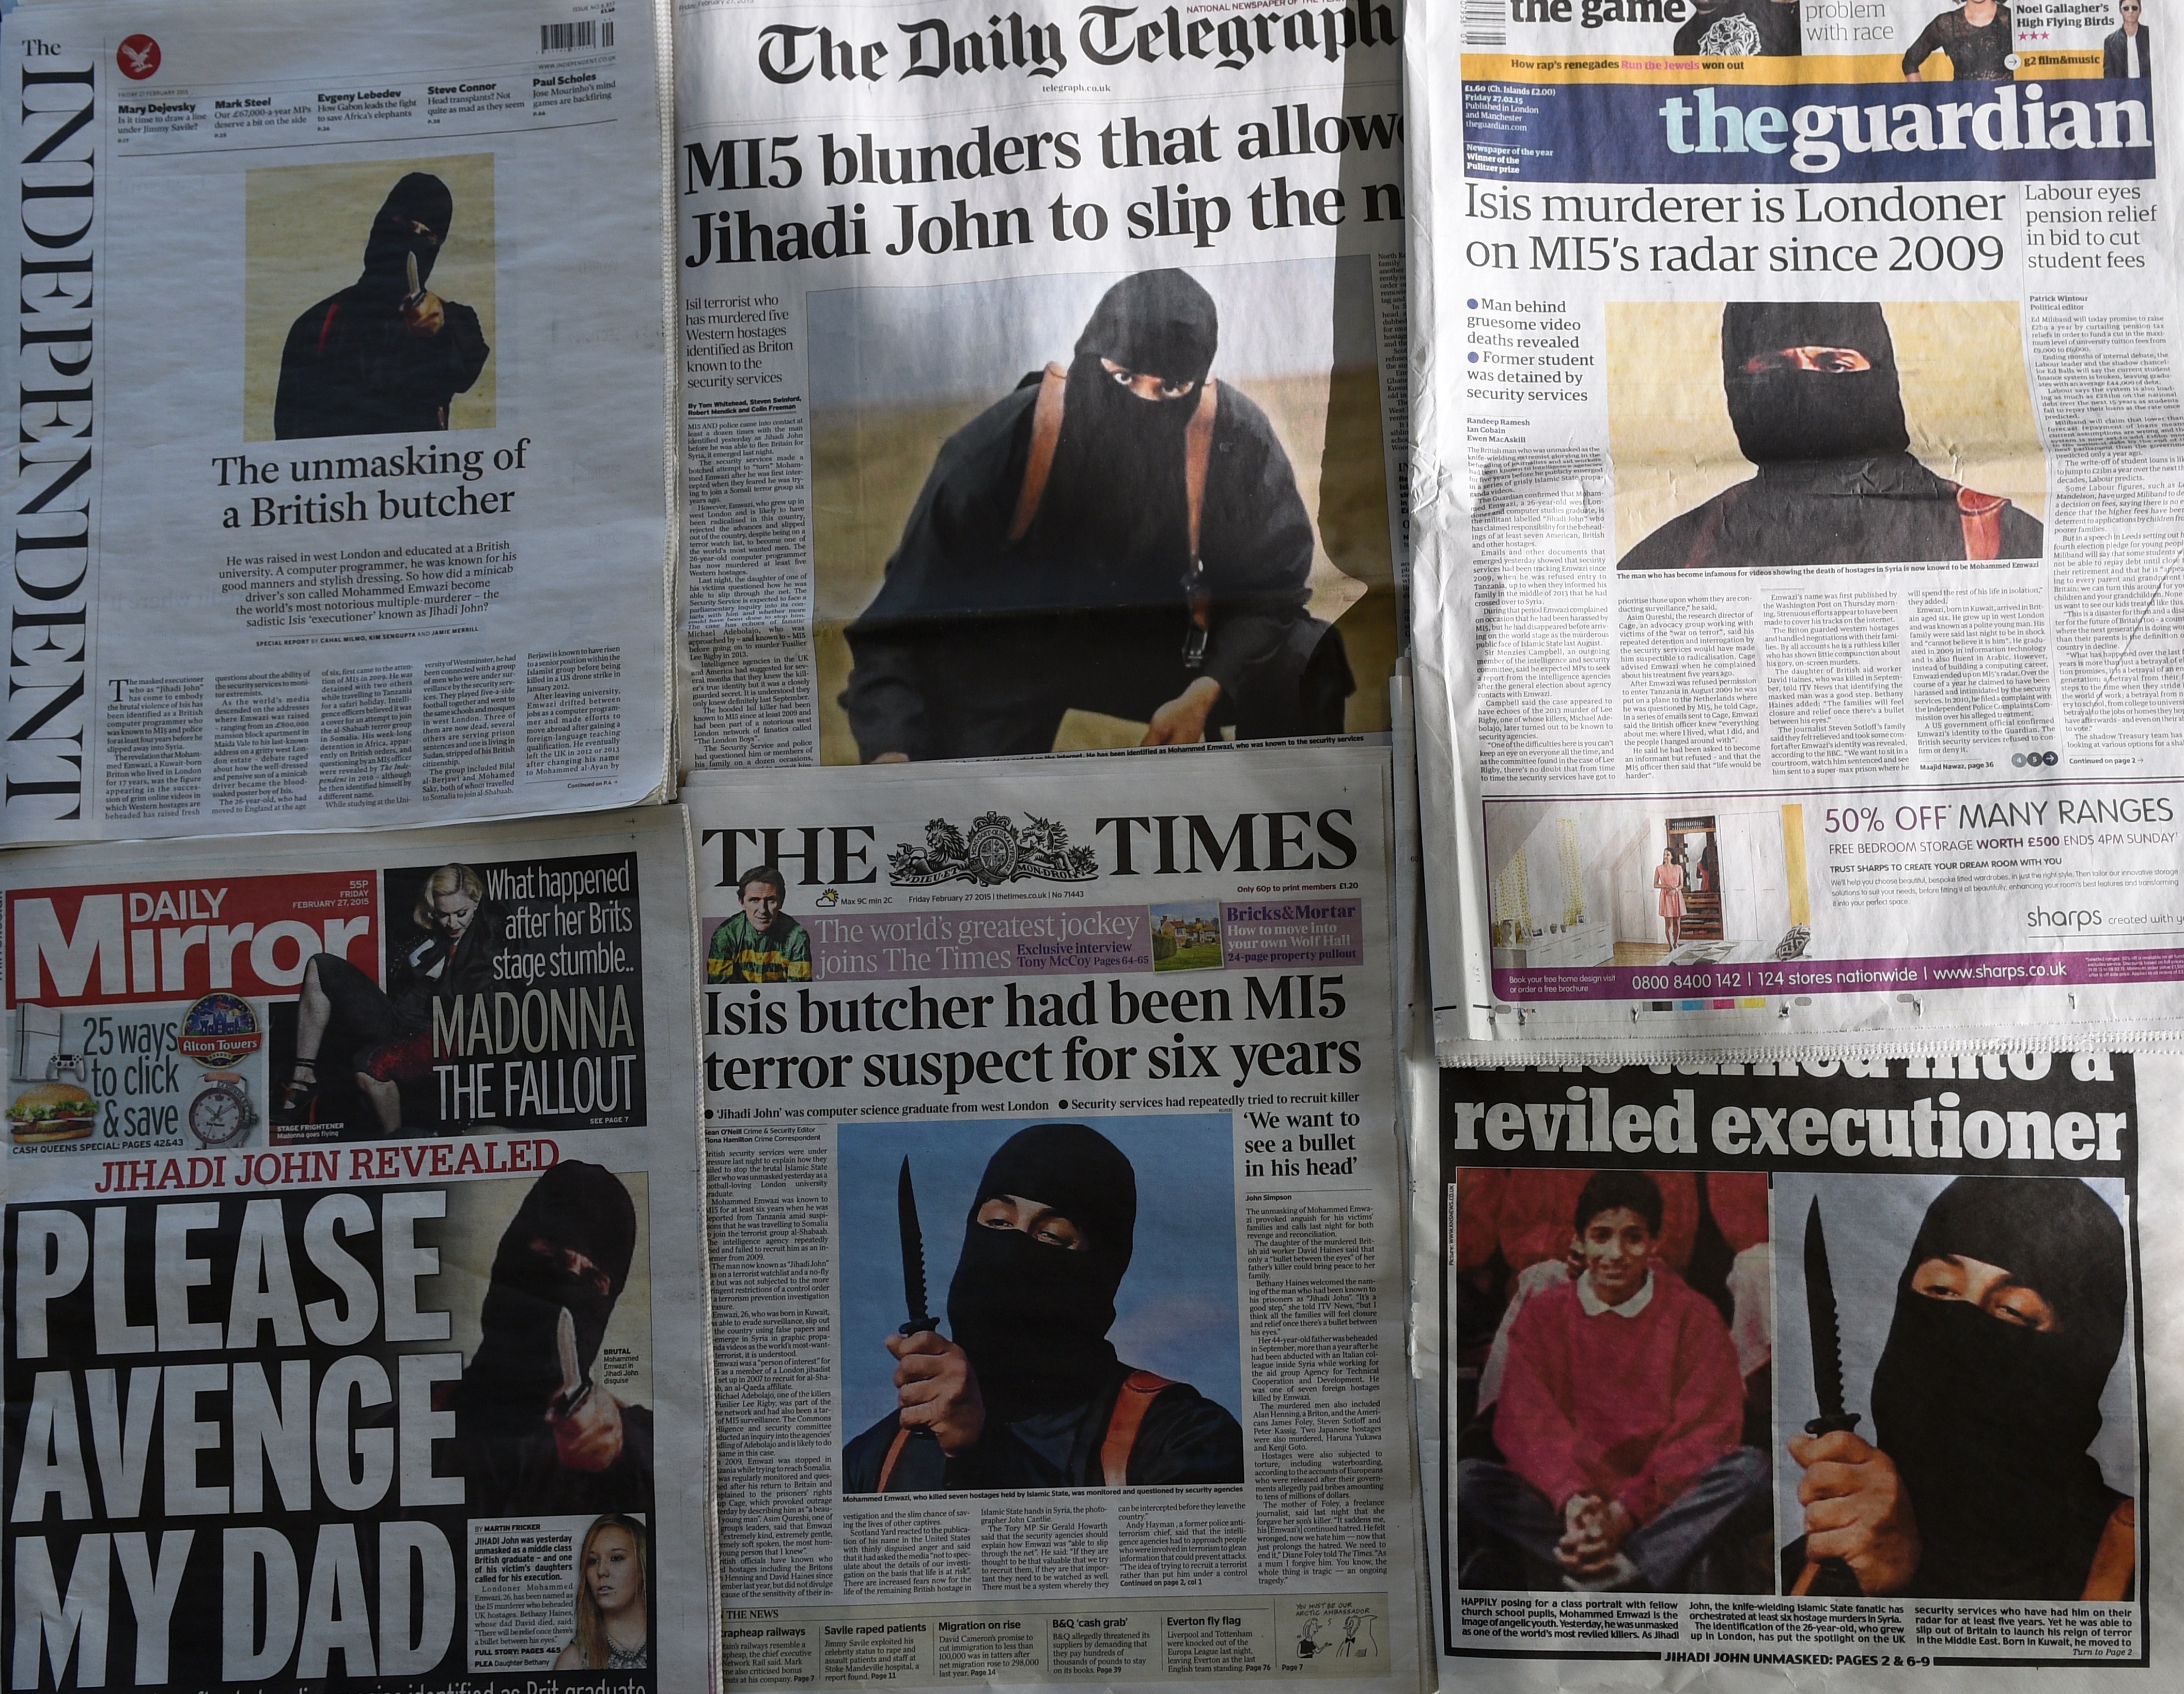 An arrangement of British daily newspapers photographed in London on February 27, 2015 shows the front-page headlines and stories regarding the identification of the masked Islamic State group militant dubbed "Jihadi John".